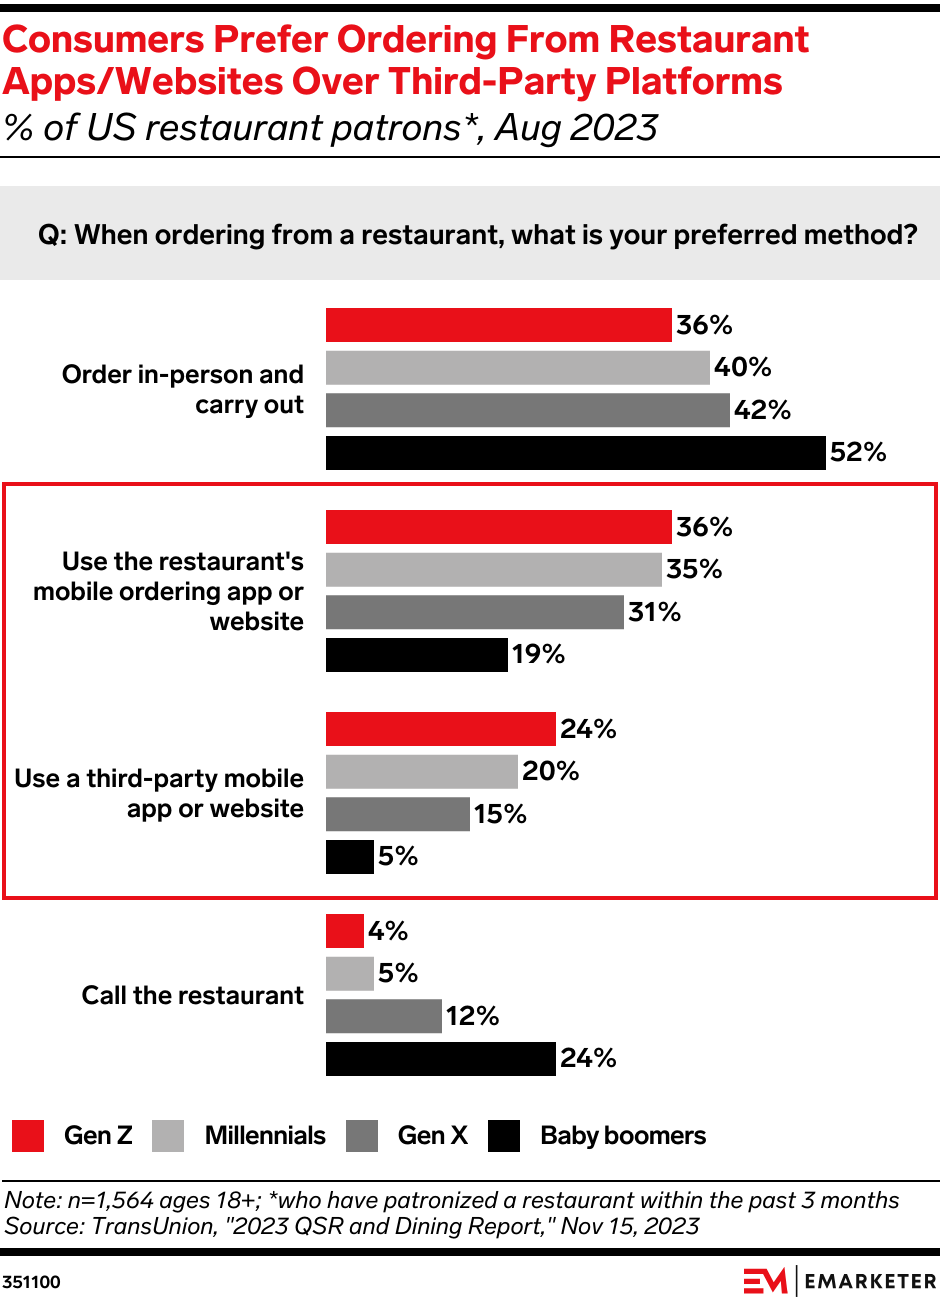 Consumers Prefer Ordering from Restaurant Apps/Websites Over Third-Party Platforms